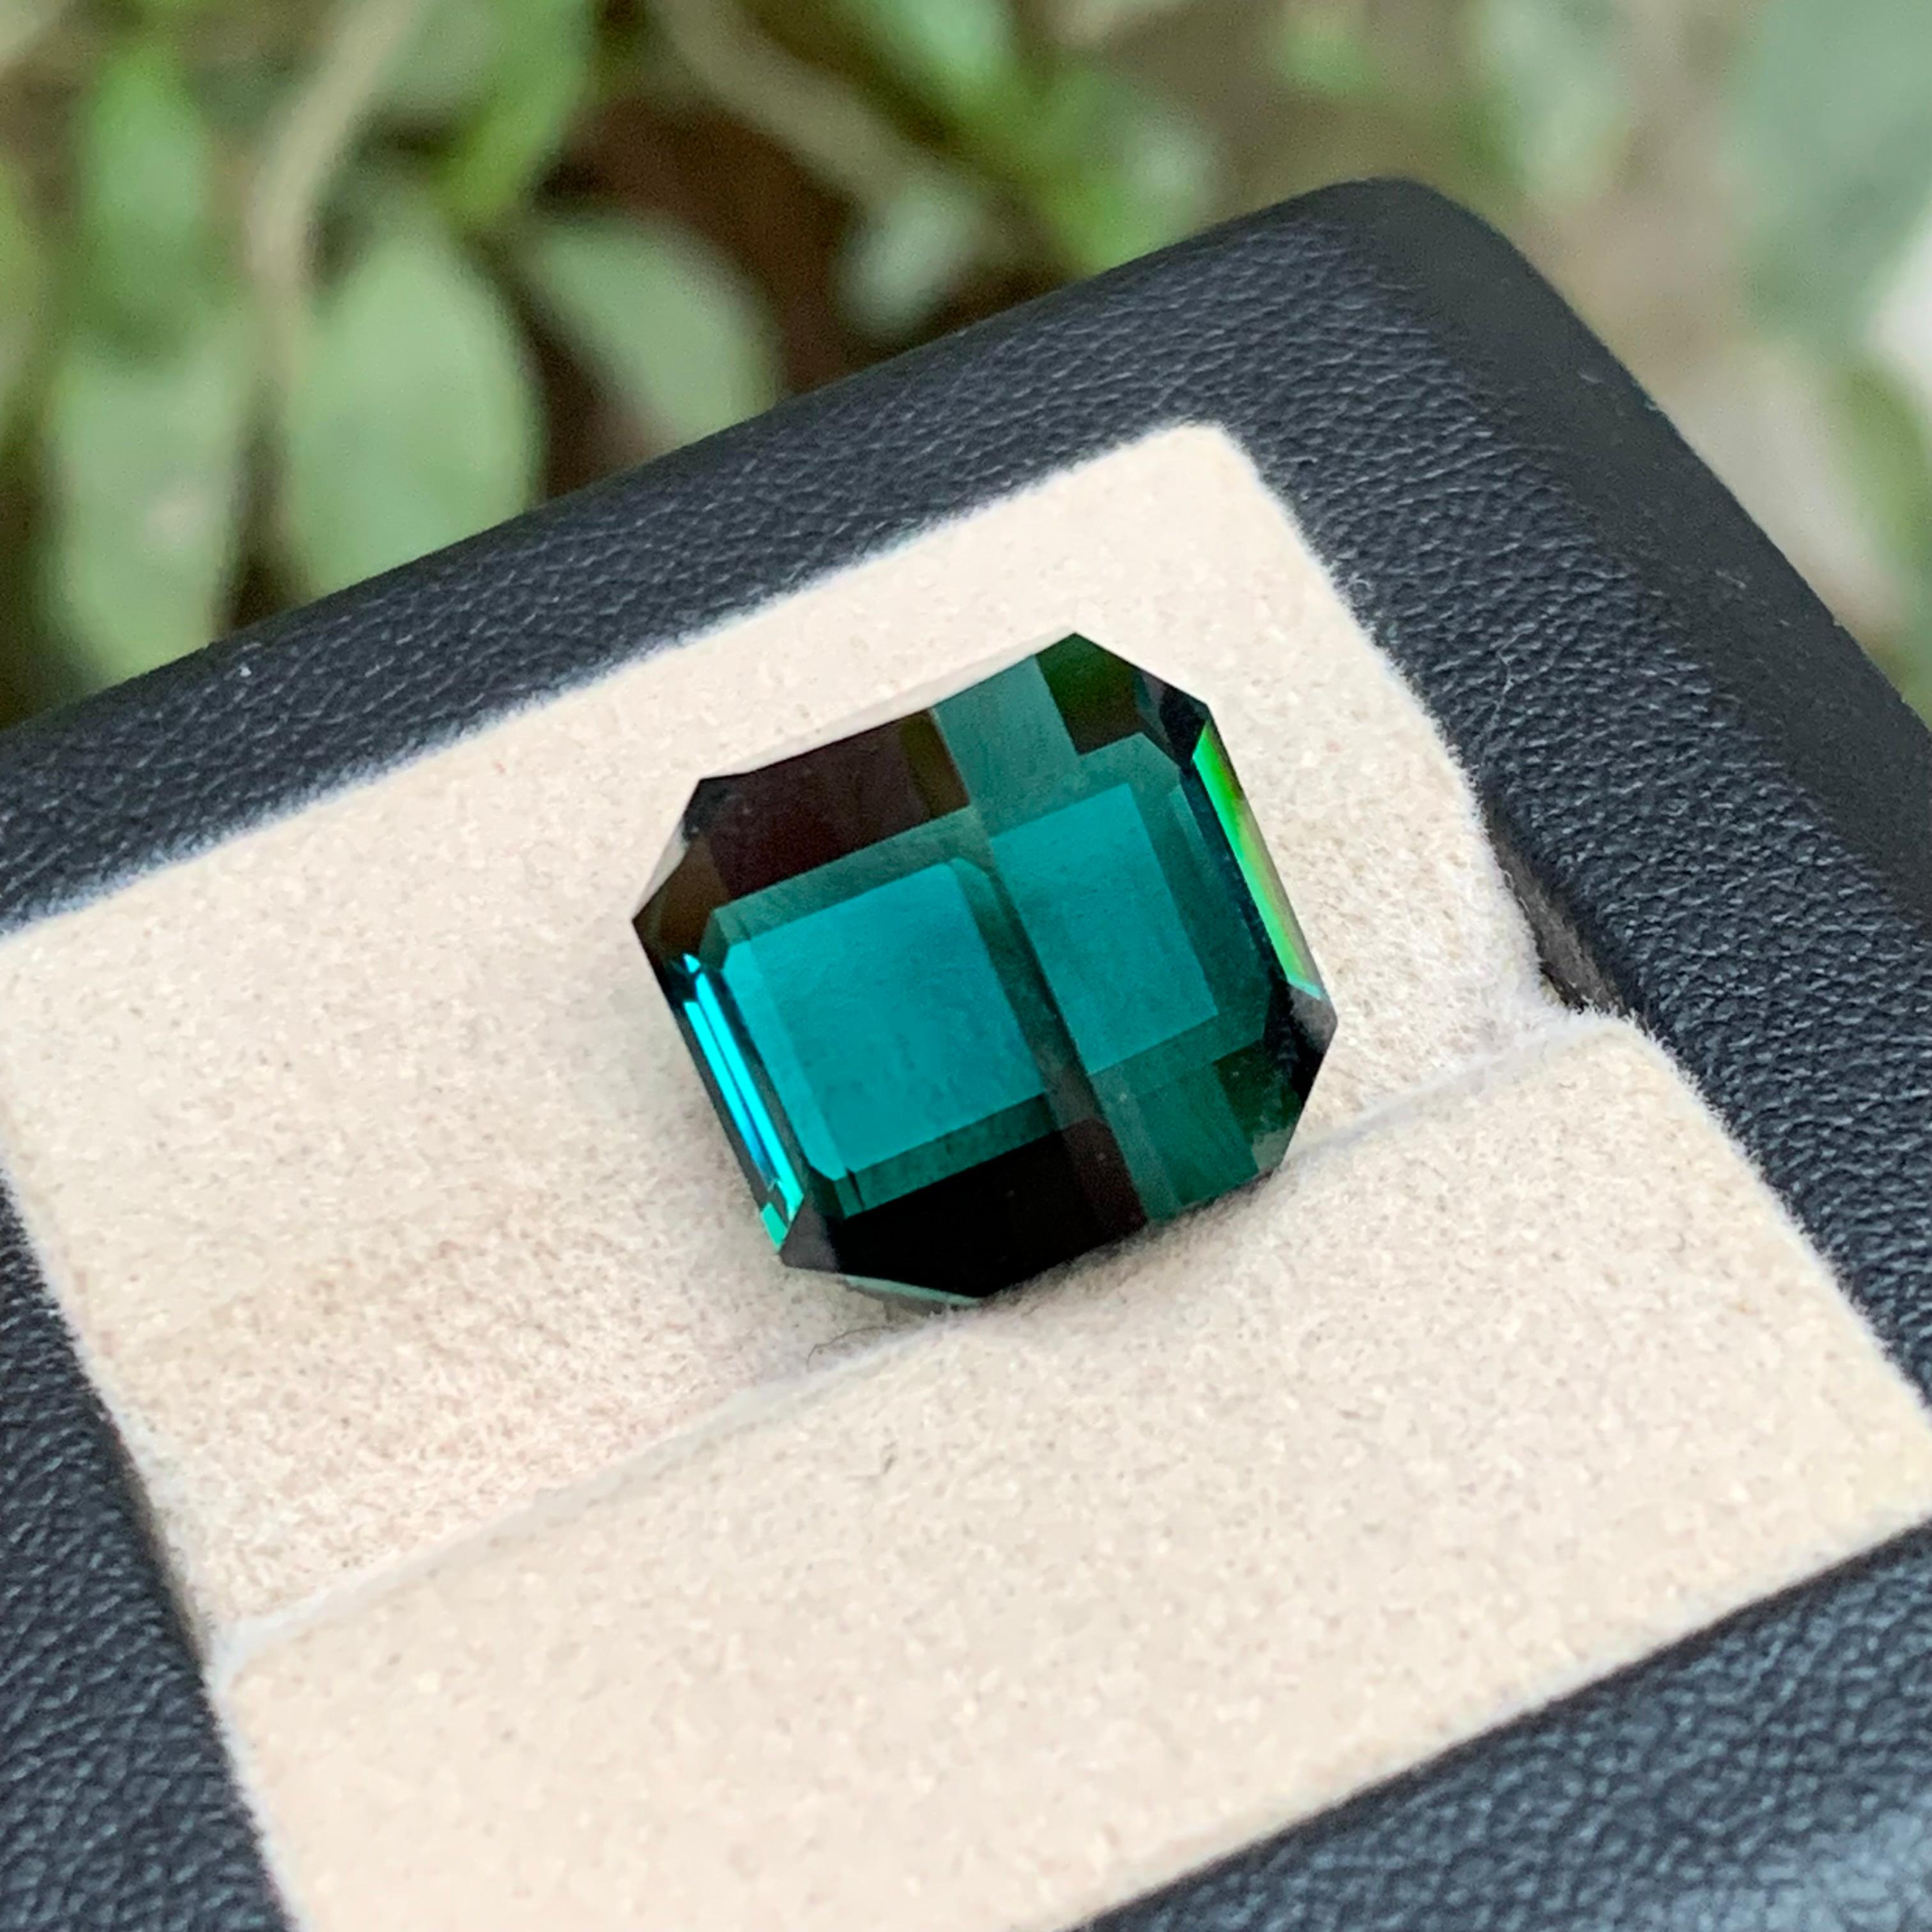 Rare Teal Blue Flawless Tourmaline Gemstone, 15.30 Ct Emerald Cut-Ring/Pendant For Sale 4